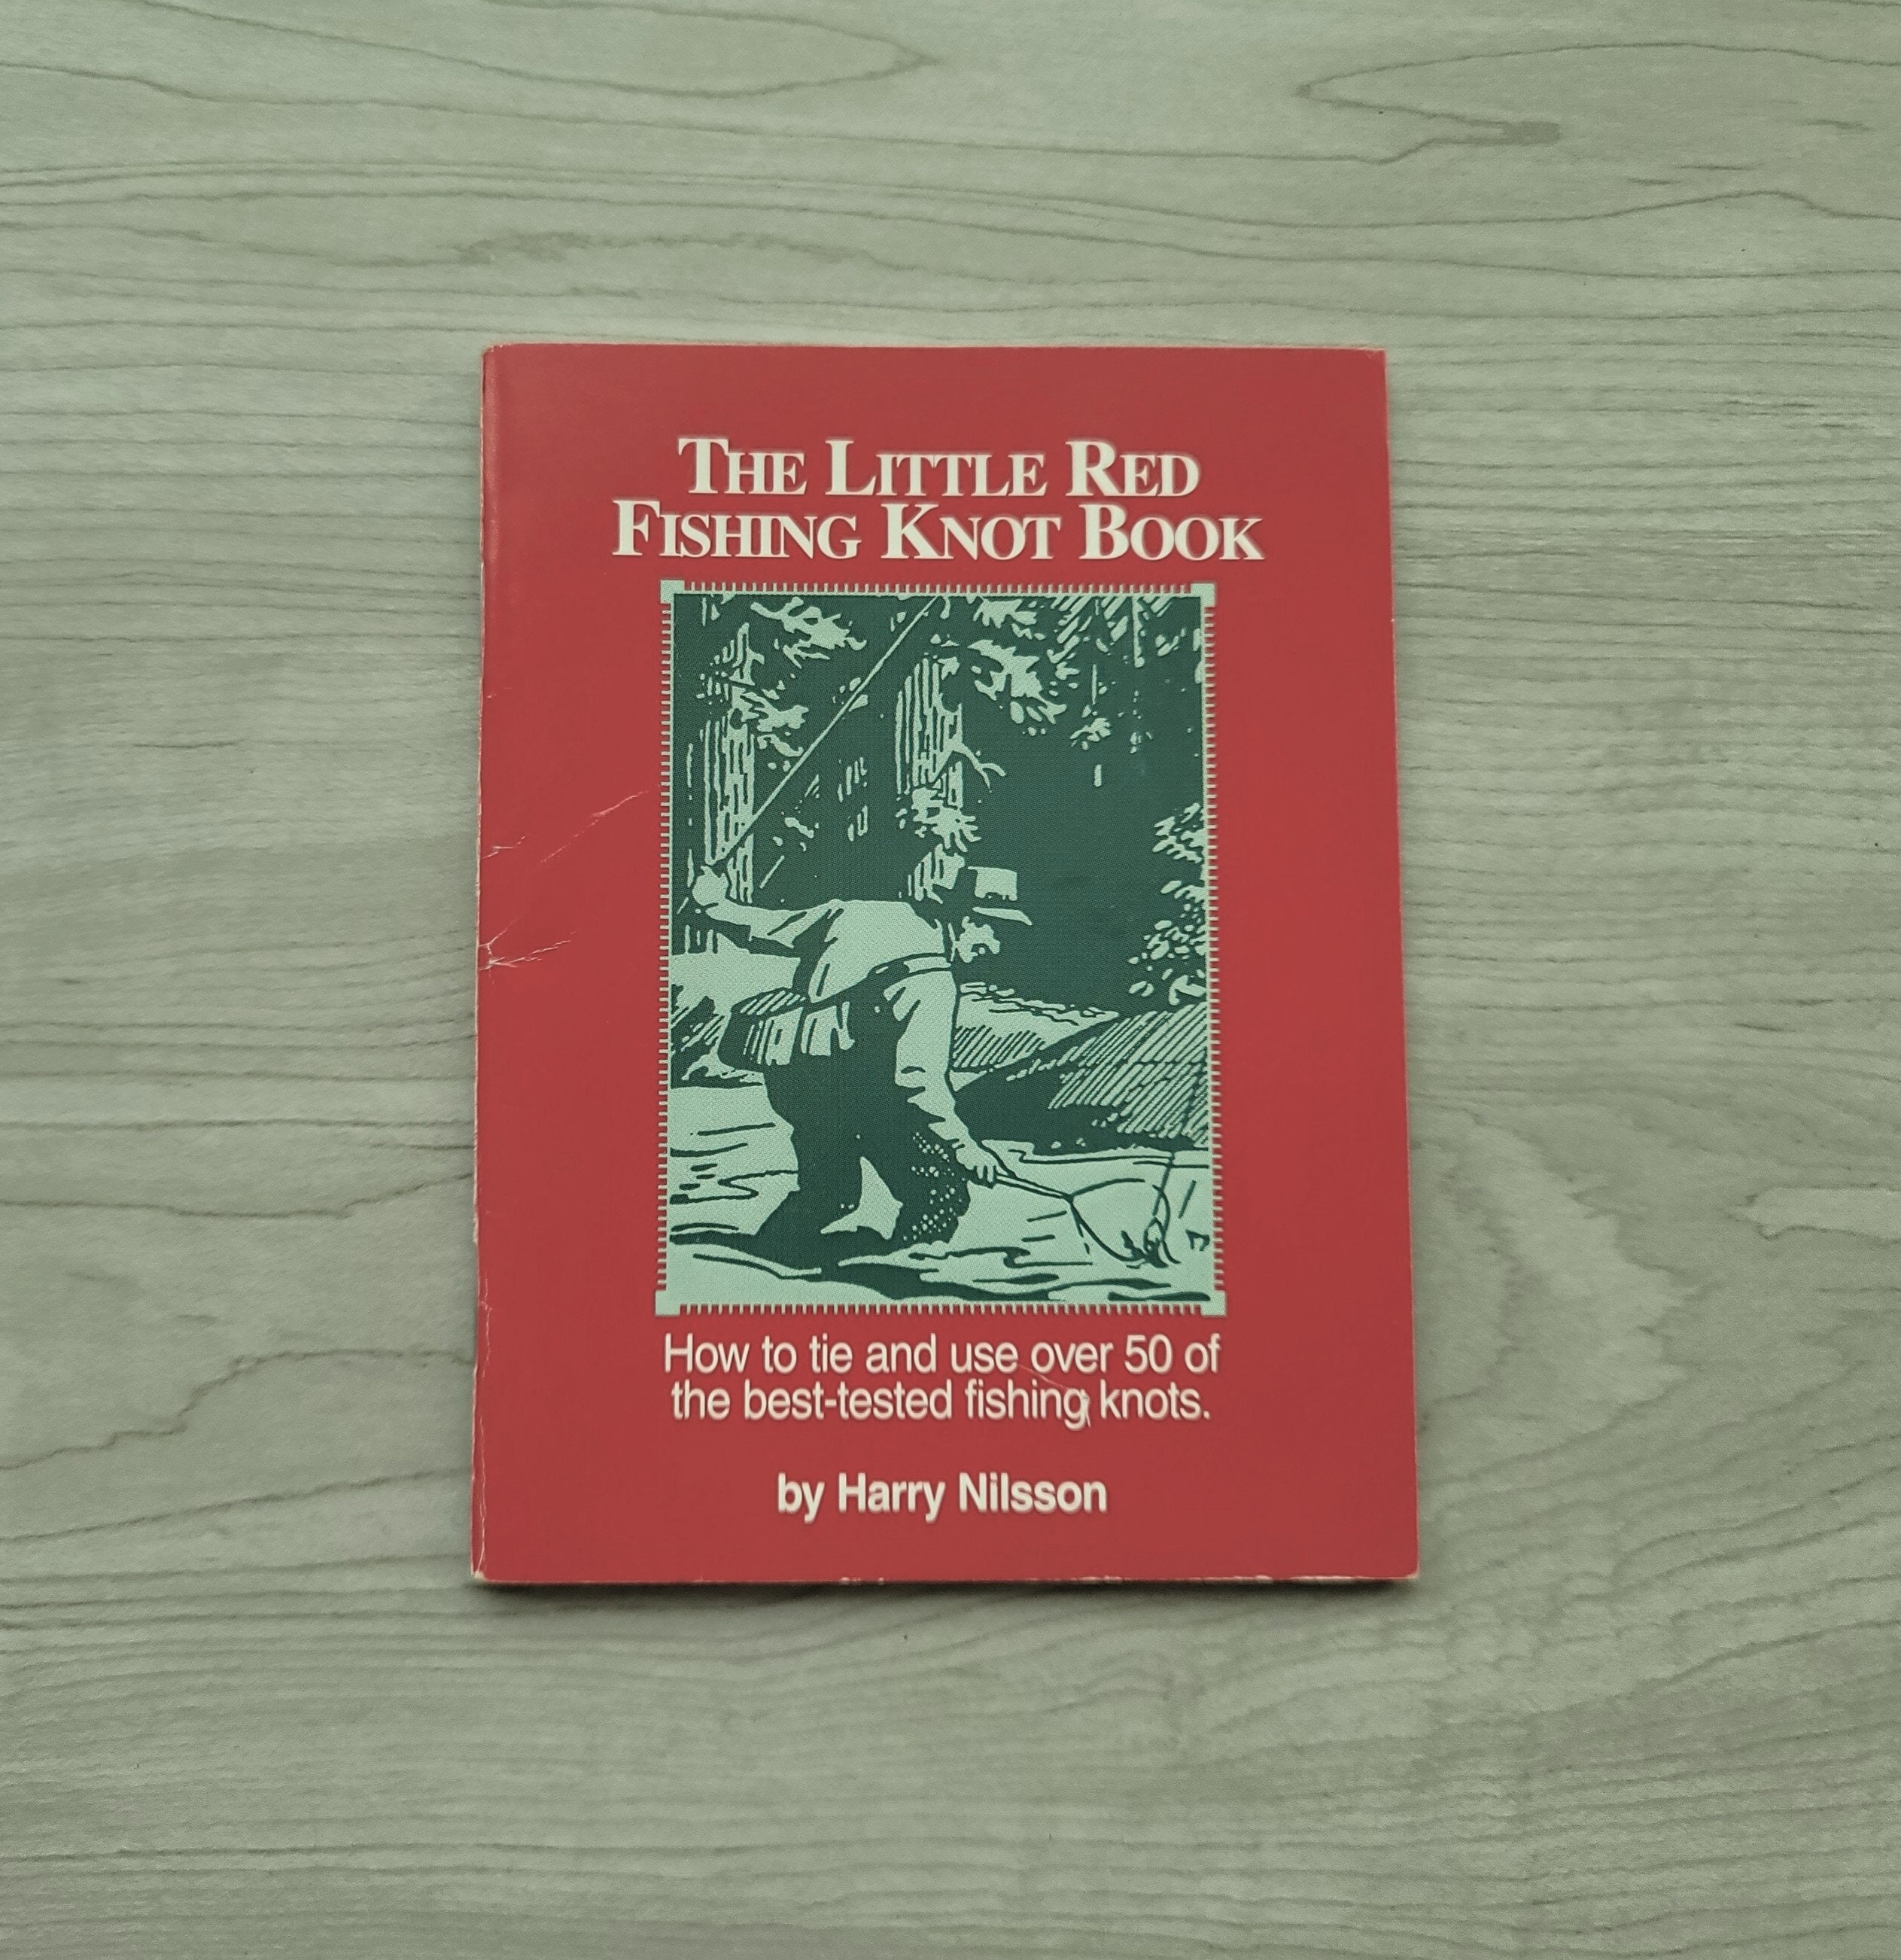 Handy Little Book the Little Red Fishing Knot Book by Harry Nilsson  Published 1997 50 Fishing Knots Fly Fishing -  Canada